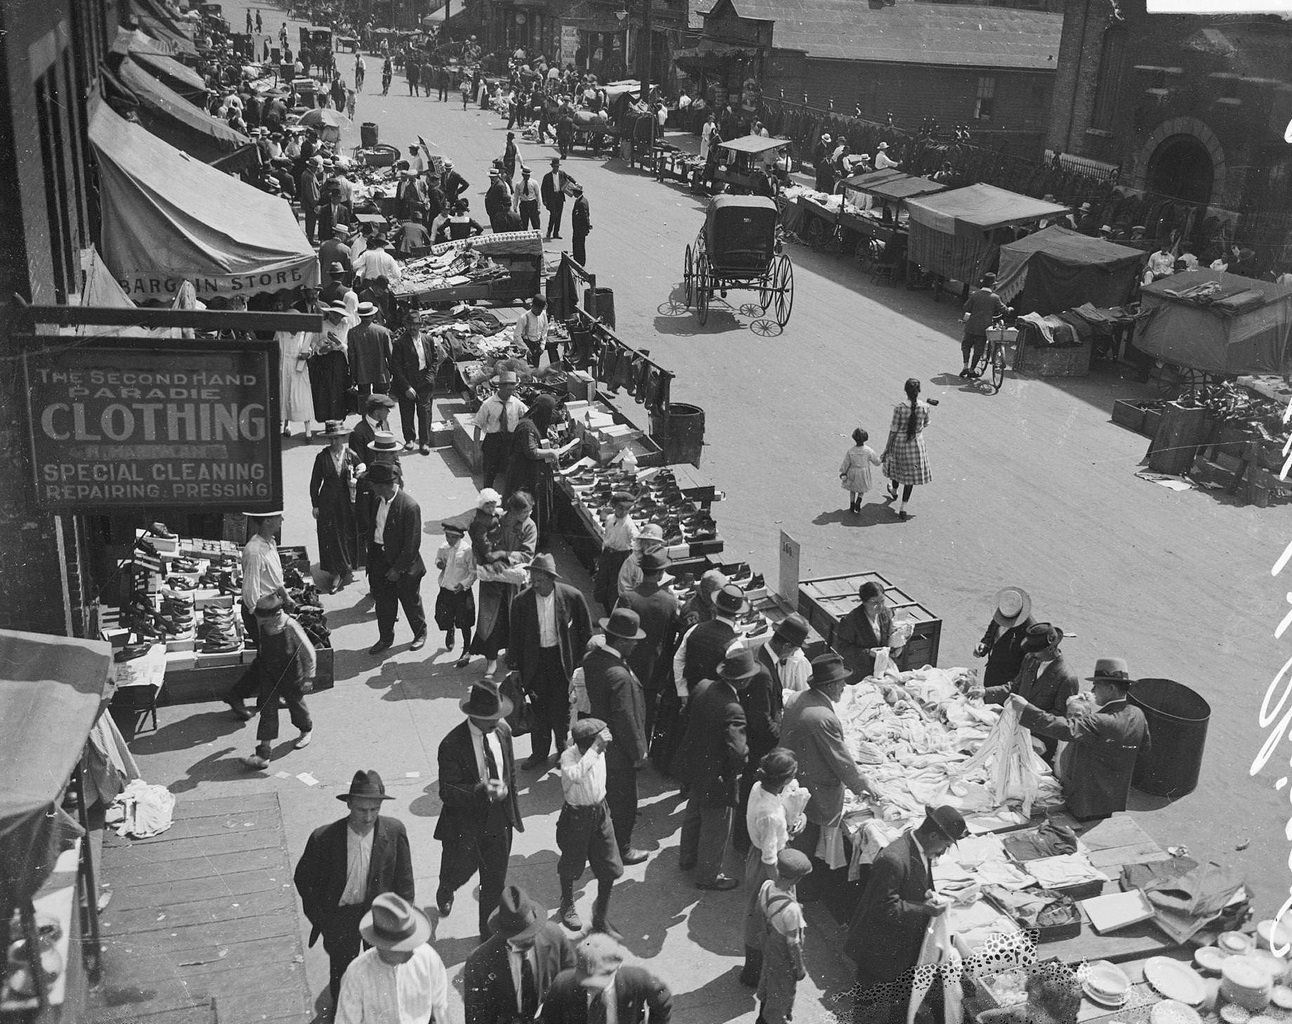 Merchants and shoppers along Maxwell Street at the Sunday market in the Chicago Jewish community located in the Near West Side community area, Chicago, Illinois, 1917.